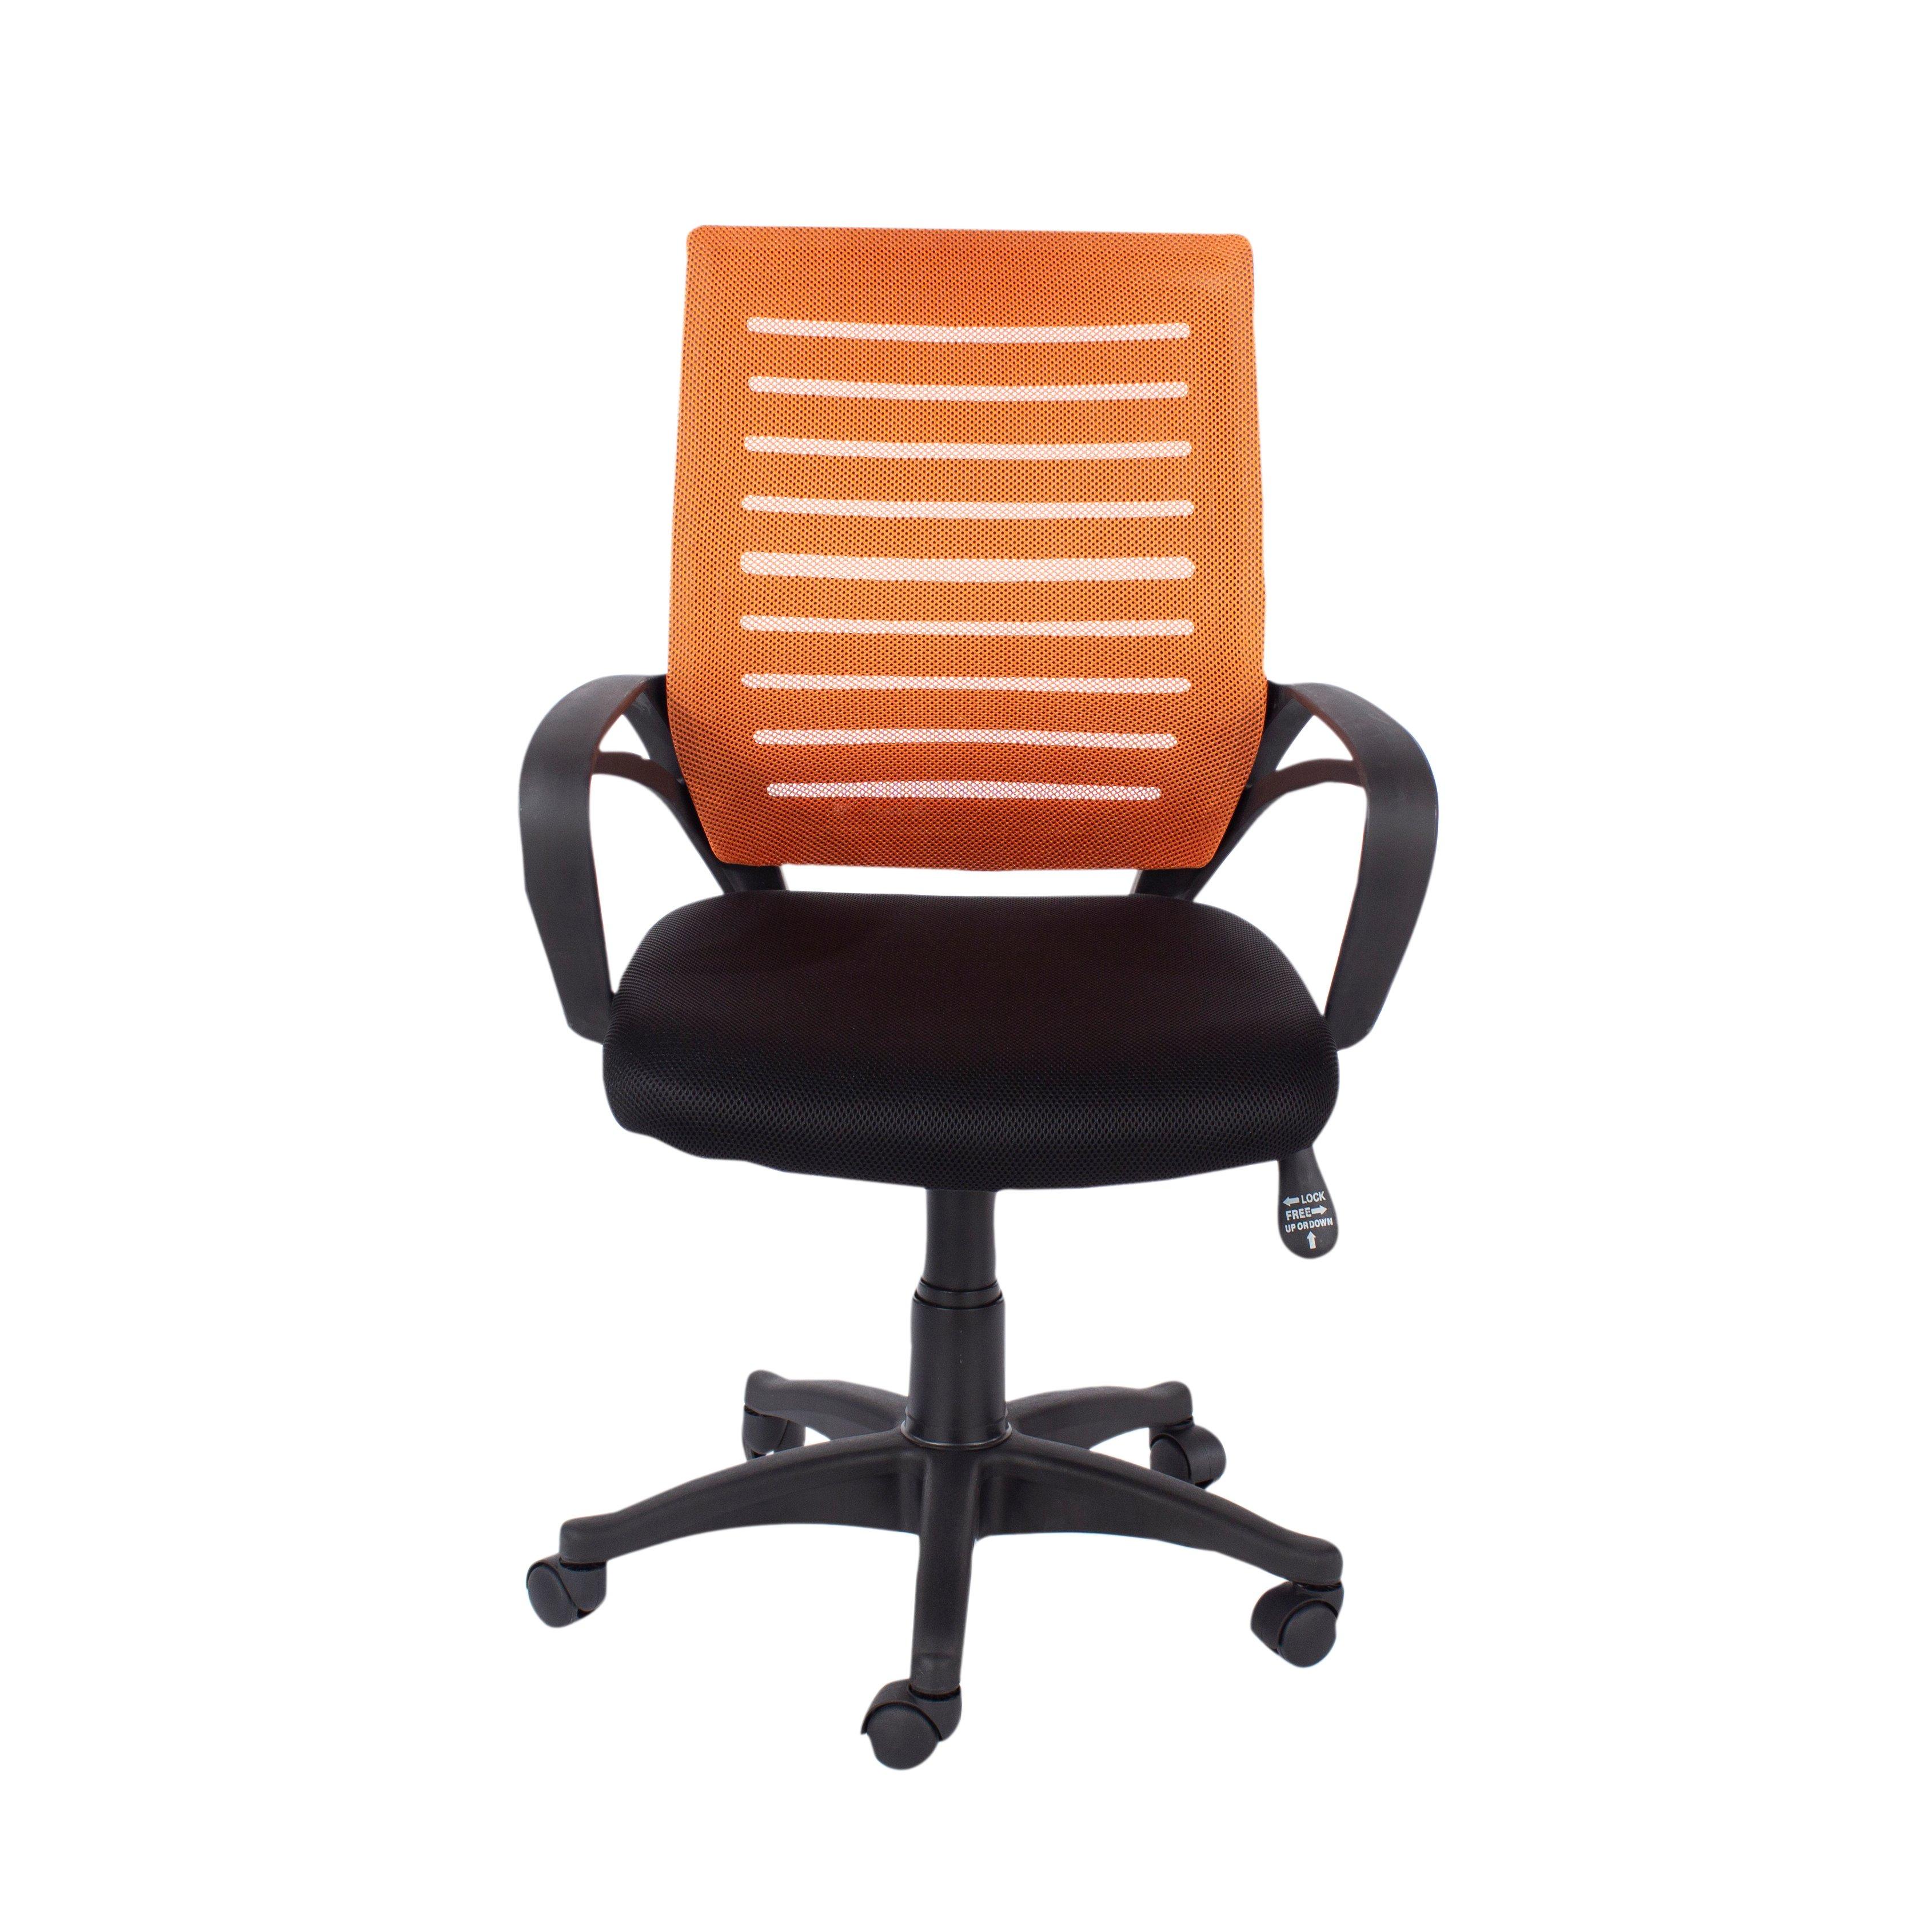 Loft Home Office Study Chair With Arms, Orange Mesh Back, Black Fabric Seat With Black Base